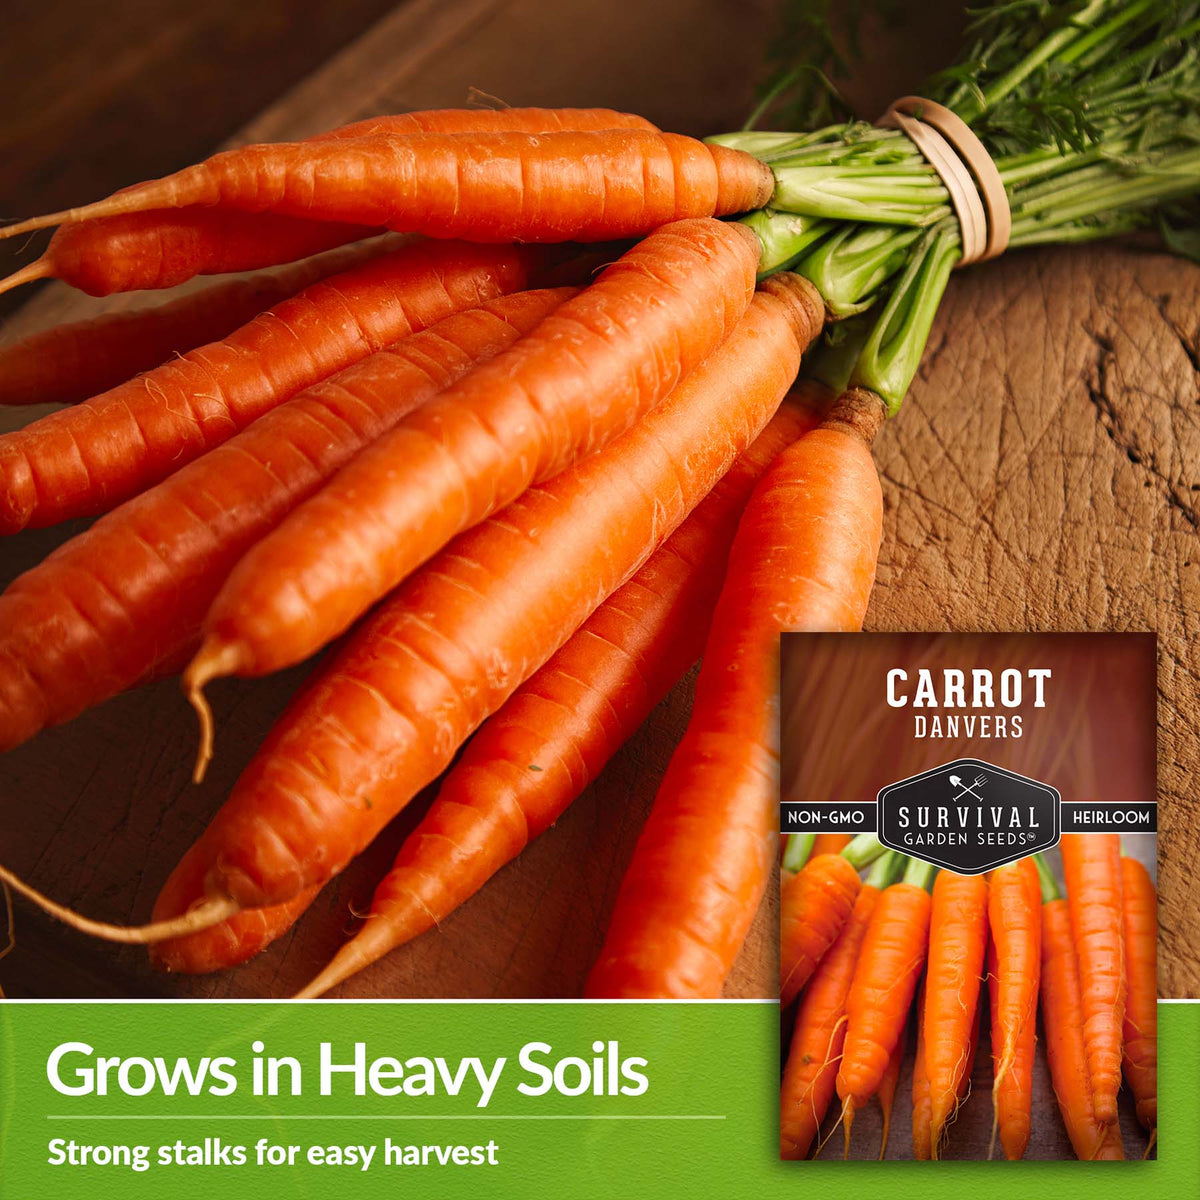 Danvers Carrots have strong stalks that grow in heavy soil